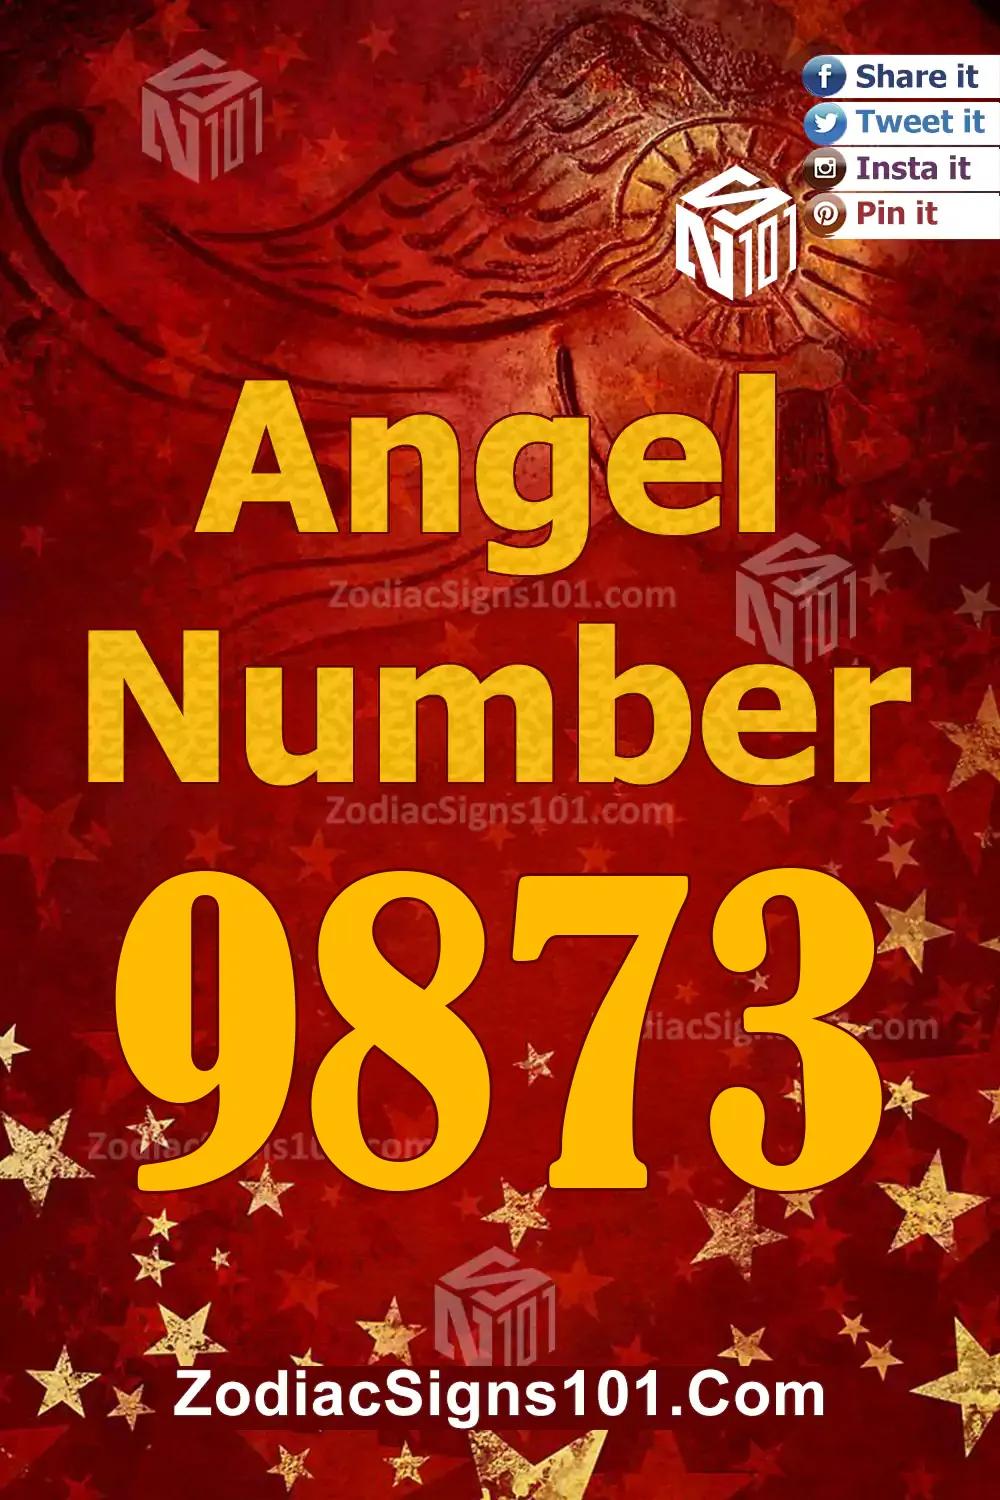 9873 Angel Number Meaning